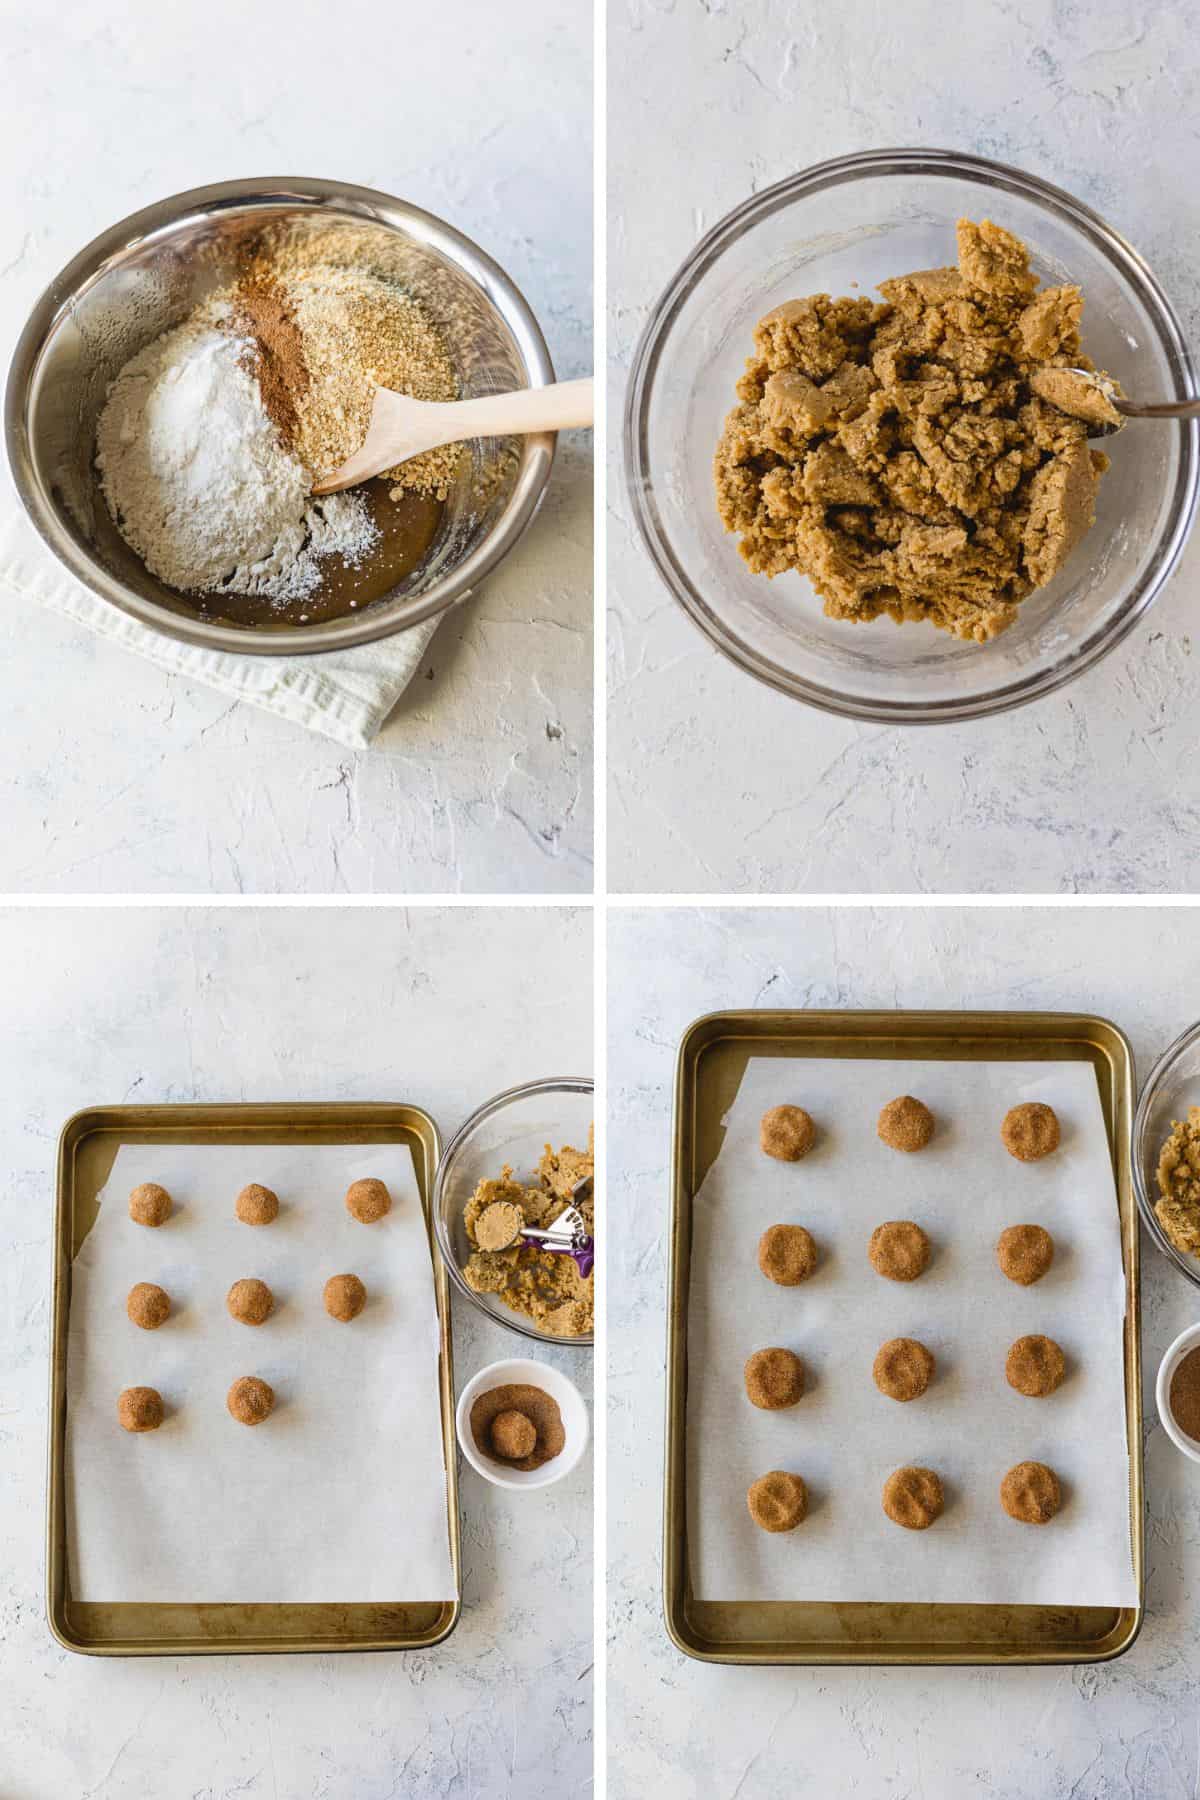 Step by step making cookies: mixing together the dough, shaping cookies, dipping in cinnamon sugar, and flattening the tops.